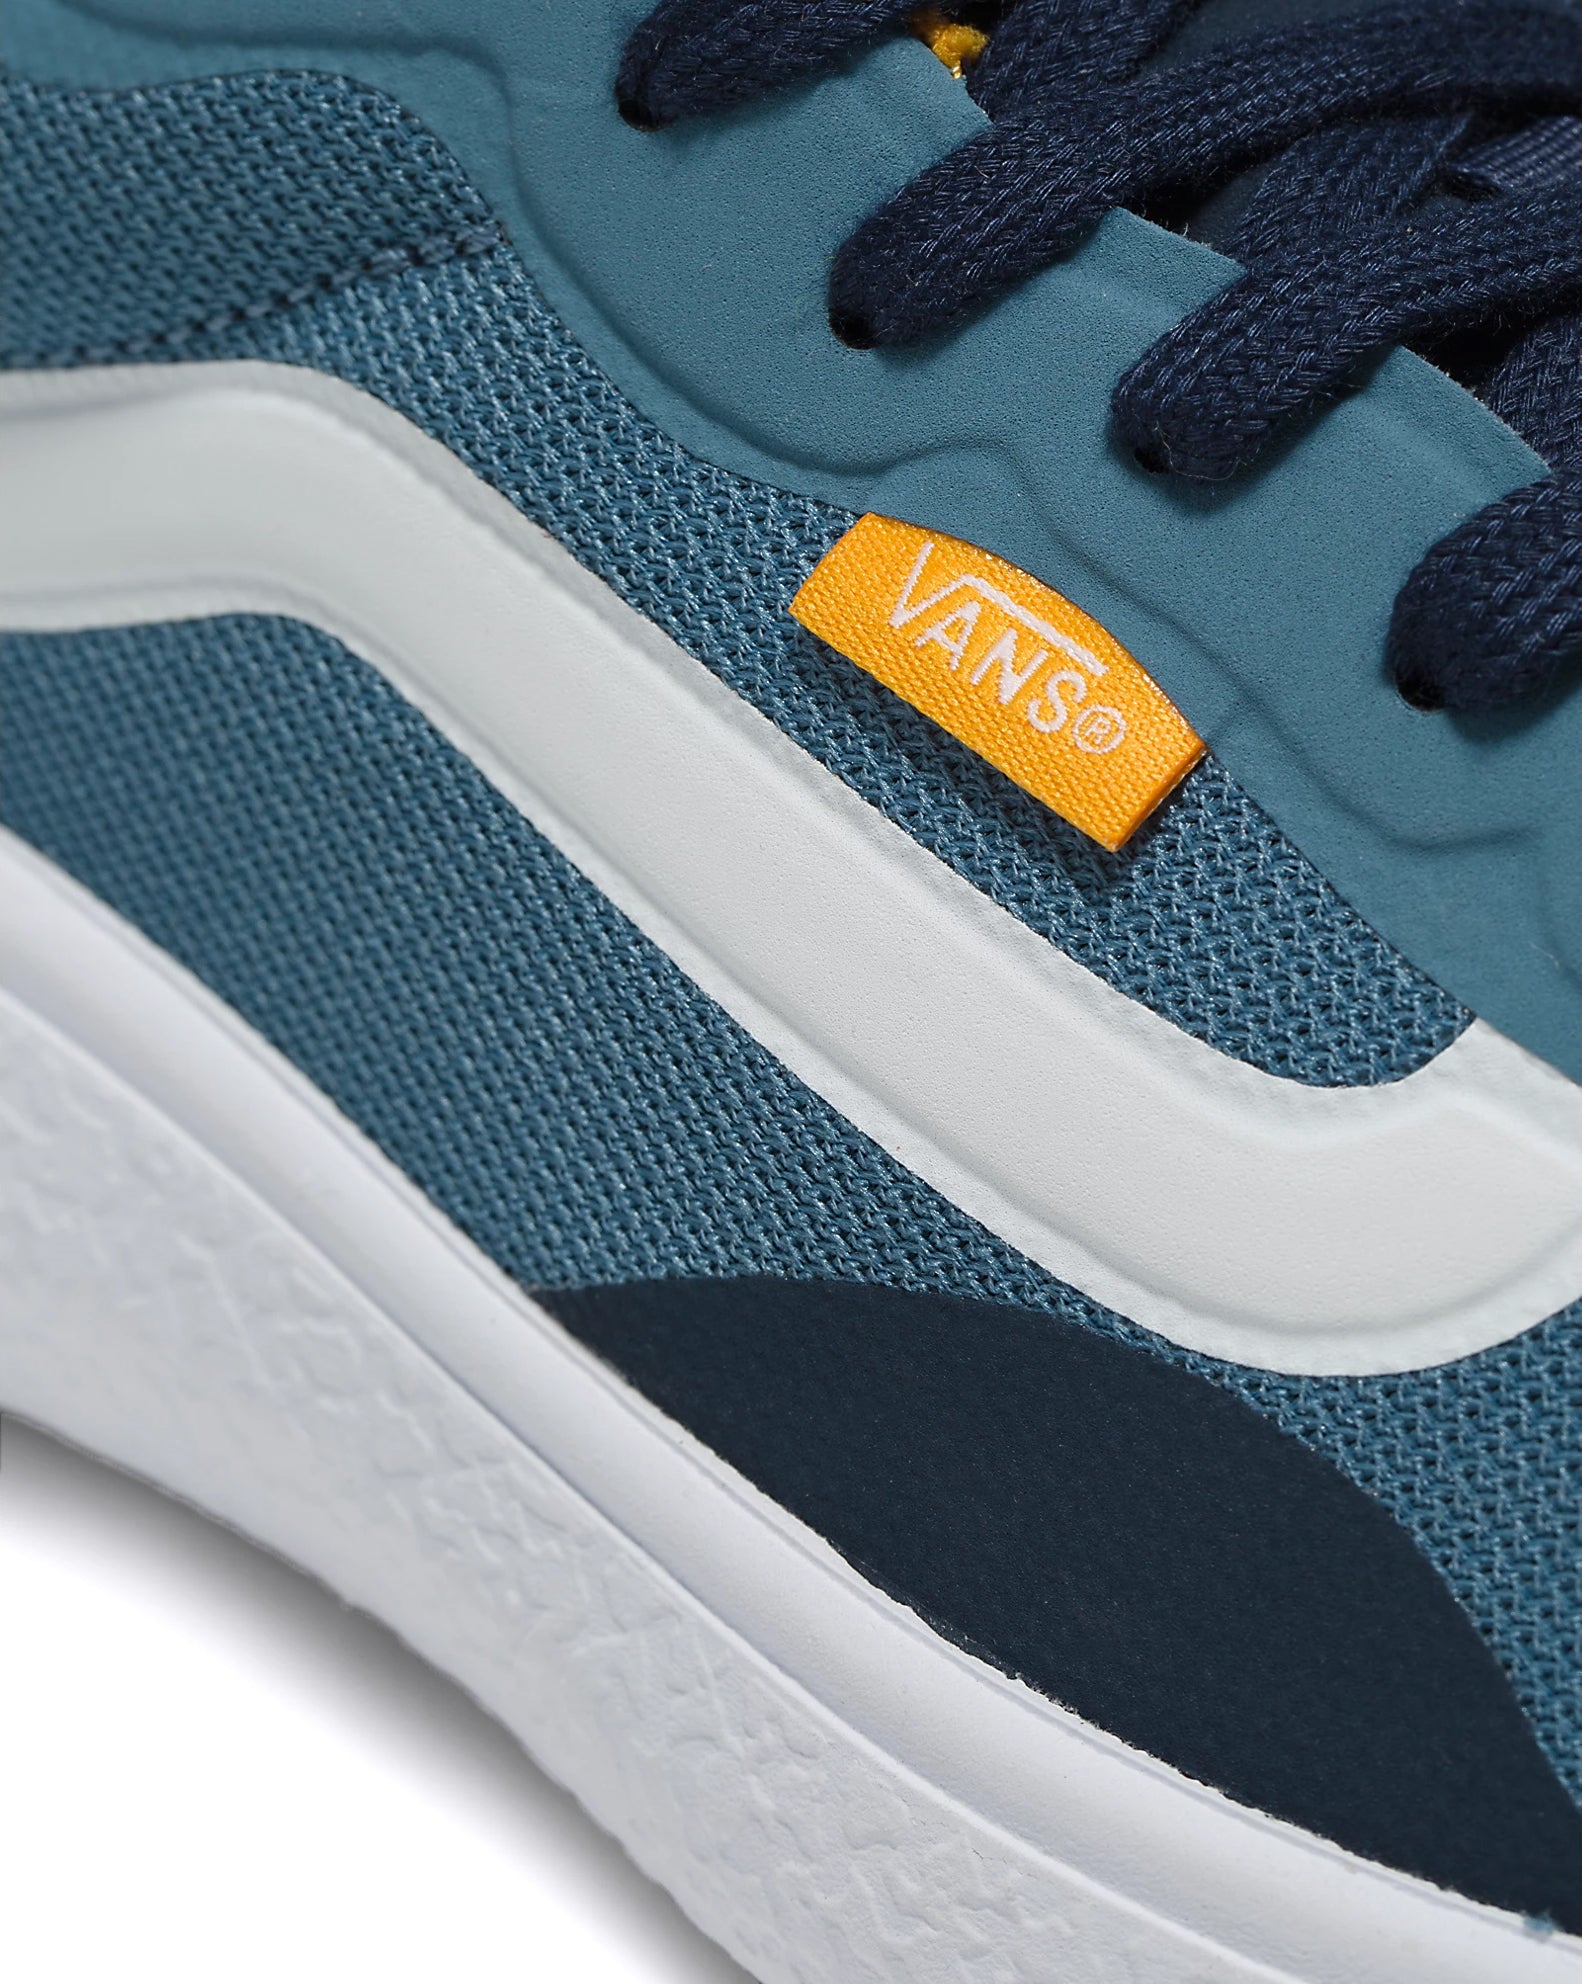 A teal and gold mesh low-top Vans sneaker.